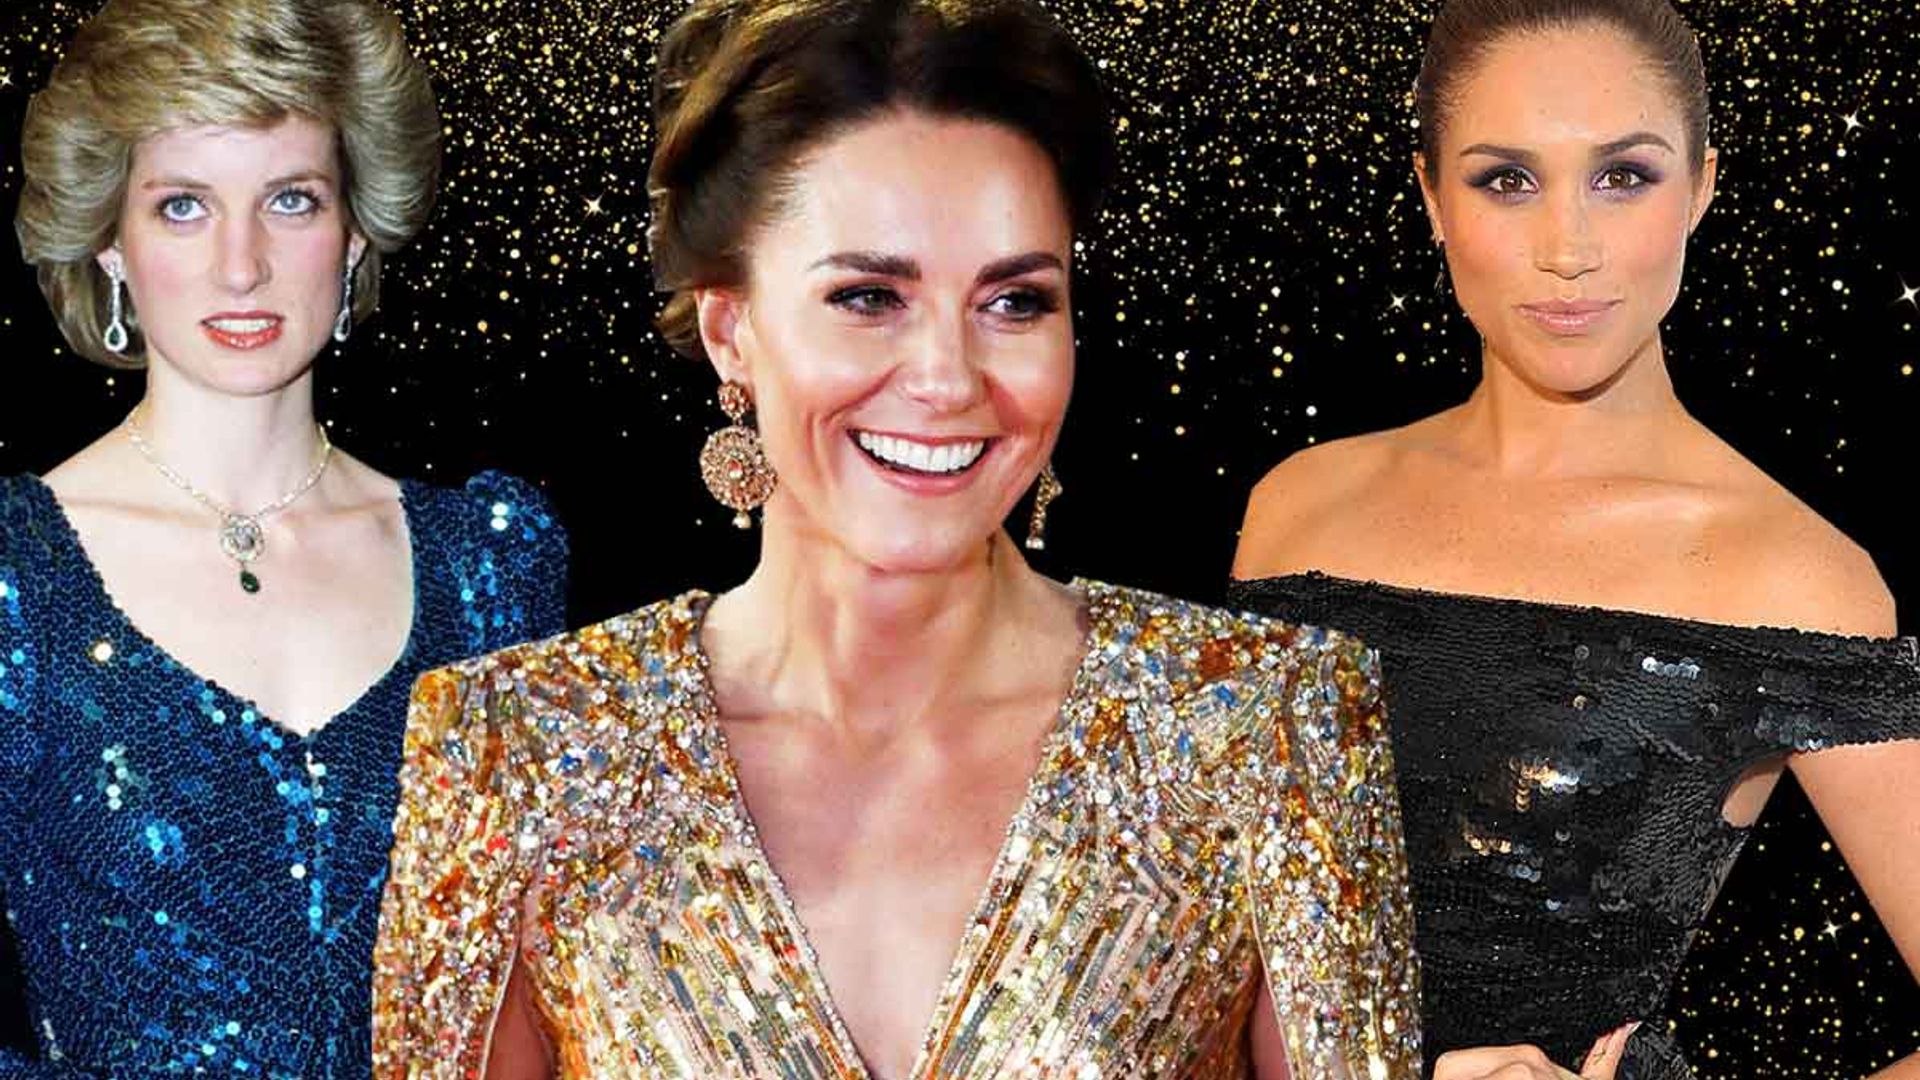 Royal ladies rocking festive sequins! Princess Kate, Meghan Markle and more in their glittering outfits